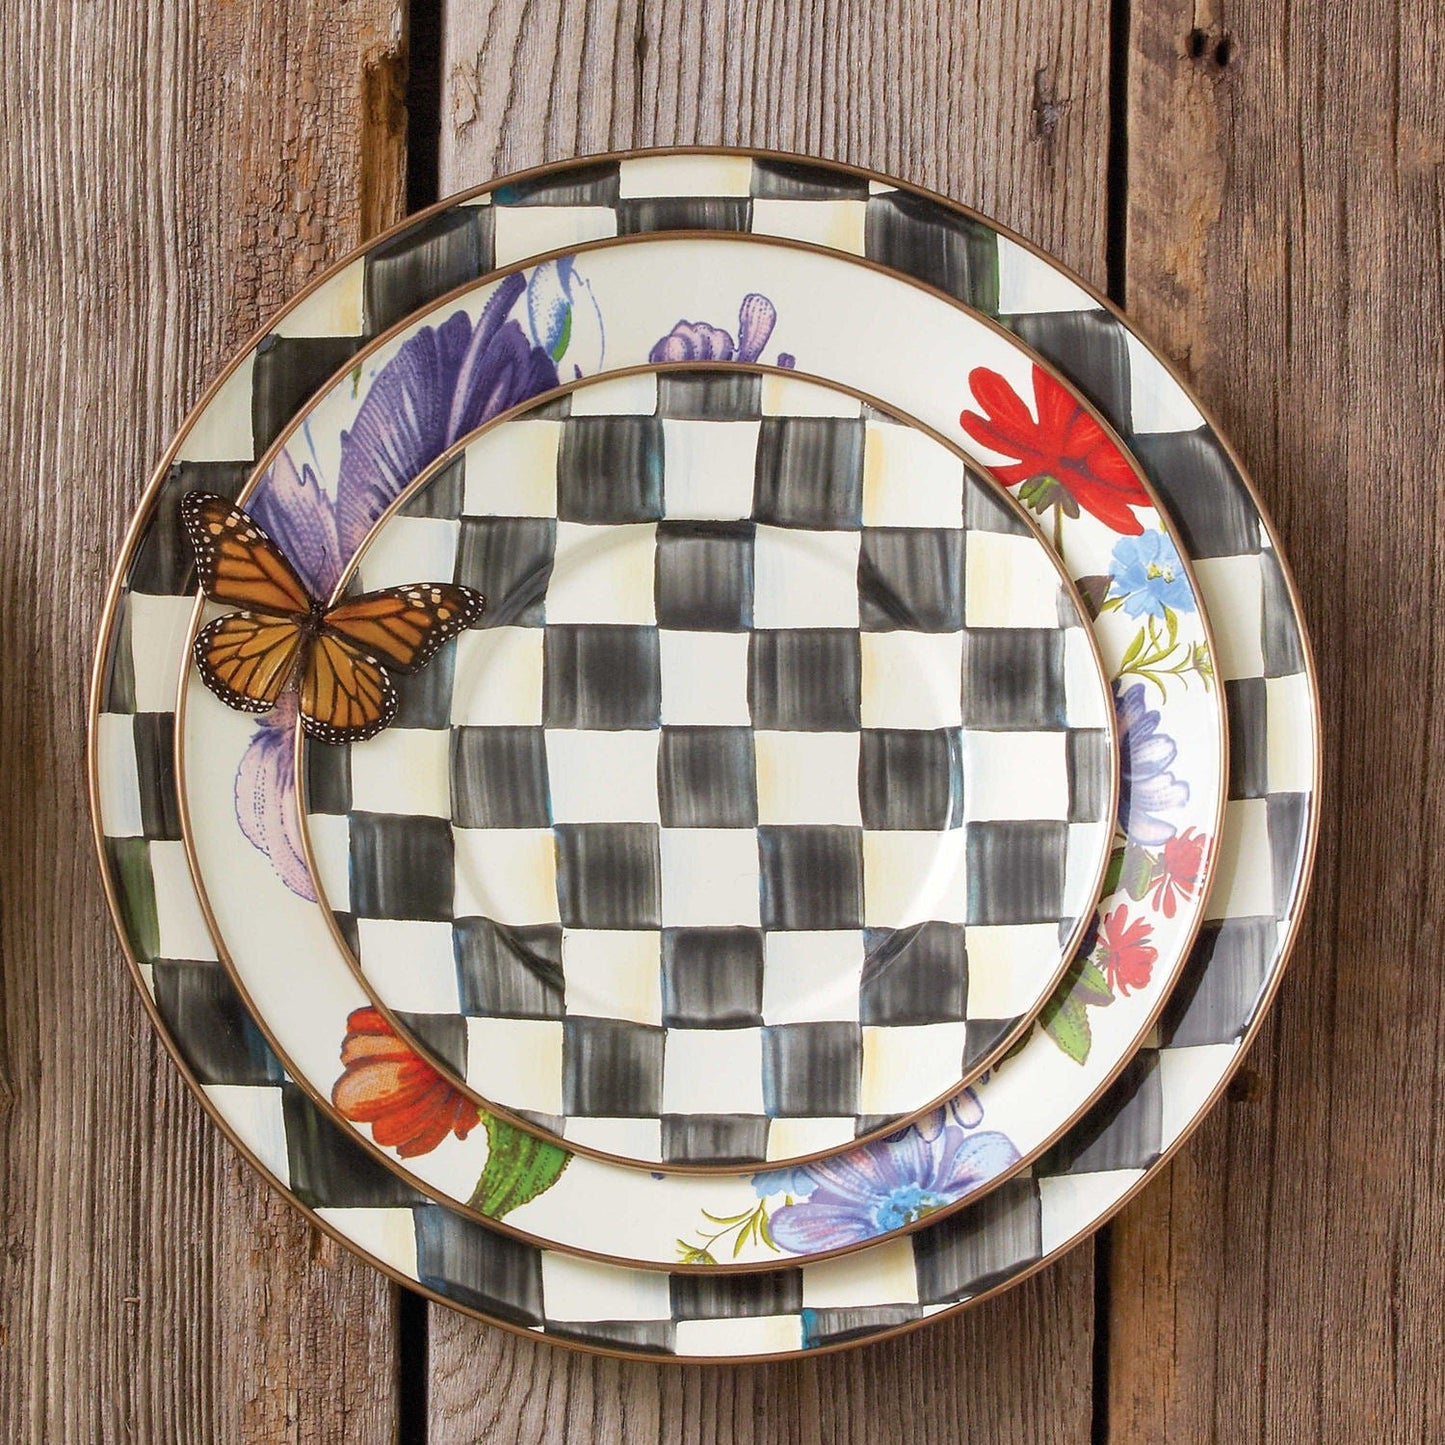 MacKenzie - Childs Courtly Check Charger/Plate - |VESIMI Design| Luxury Bathrooms and Home Decor